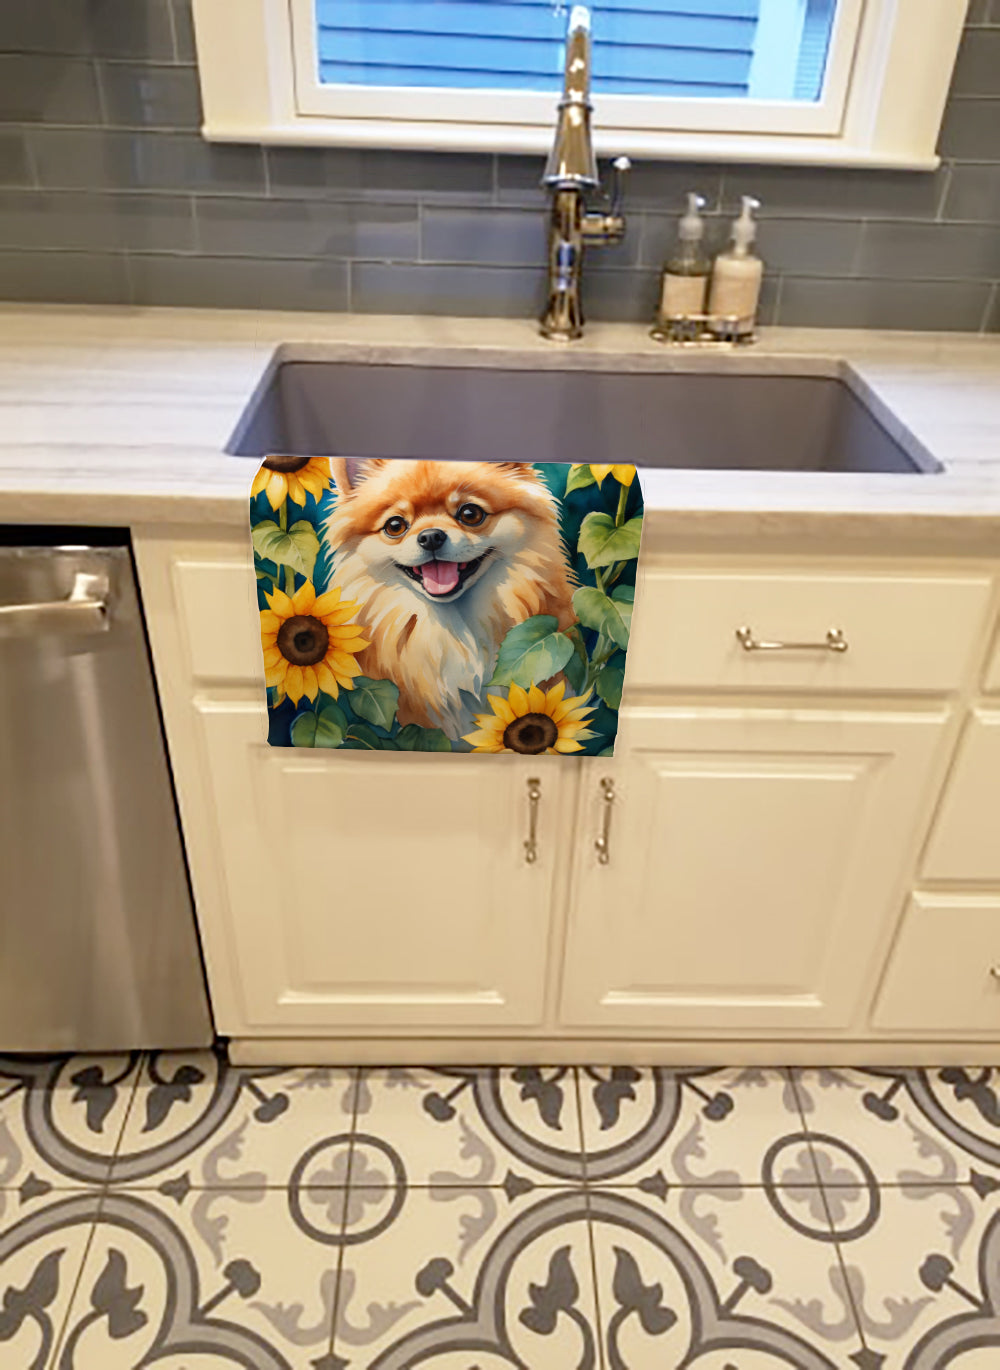 Buy this Pomeranian in Sunflowers Kitchen Towel